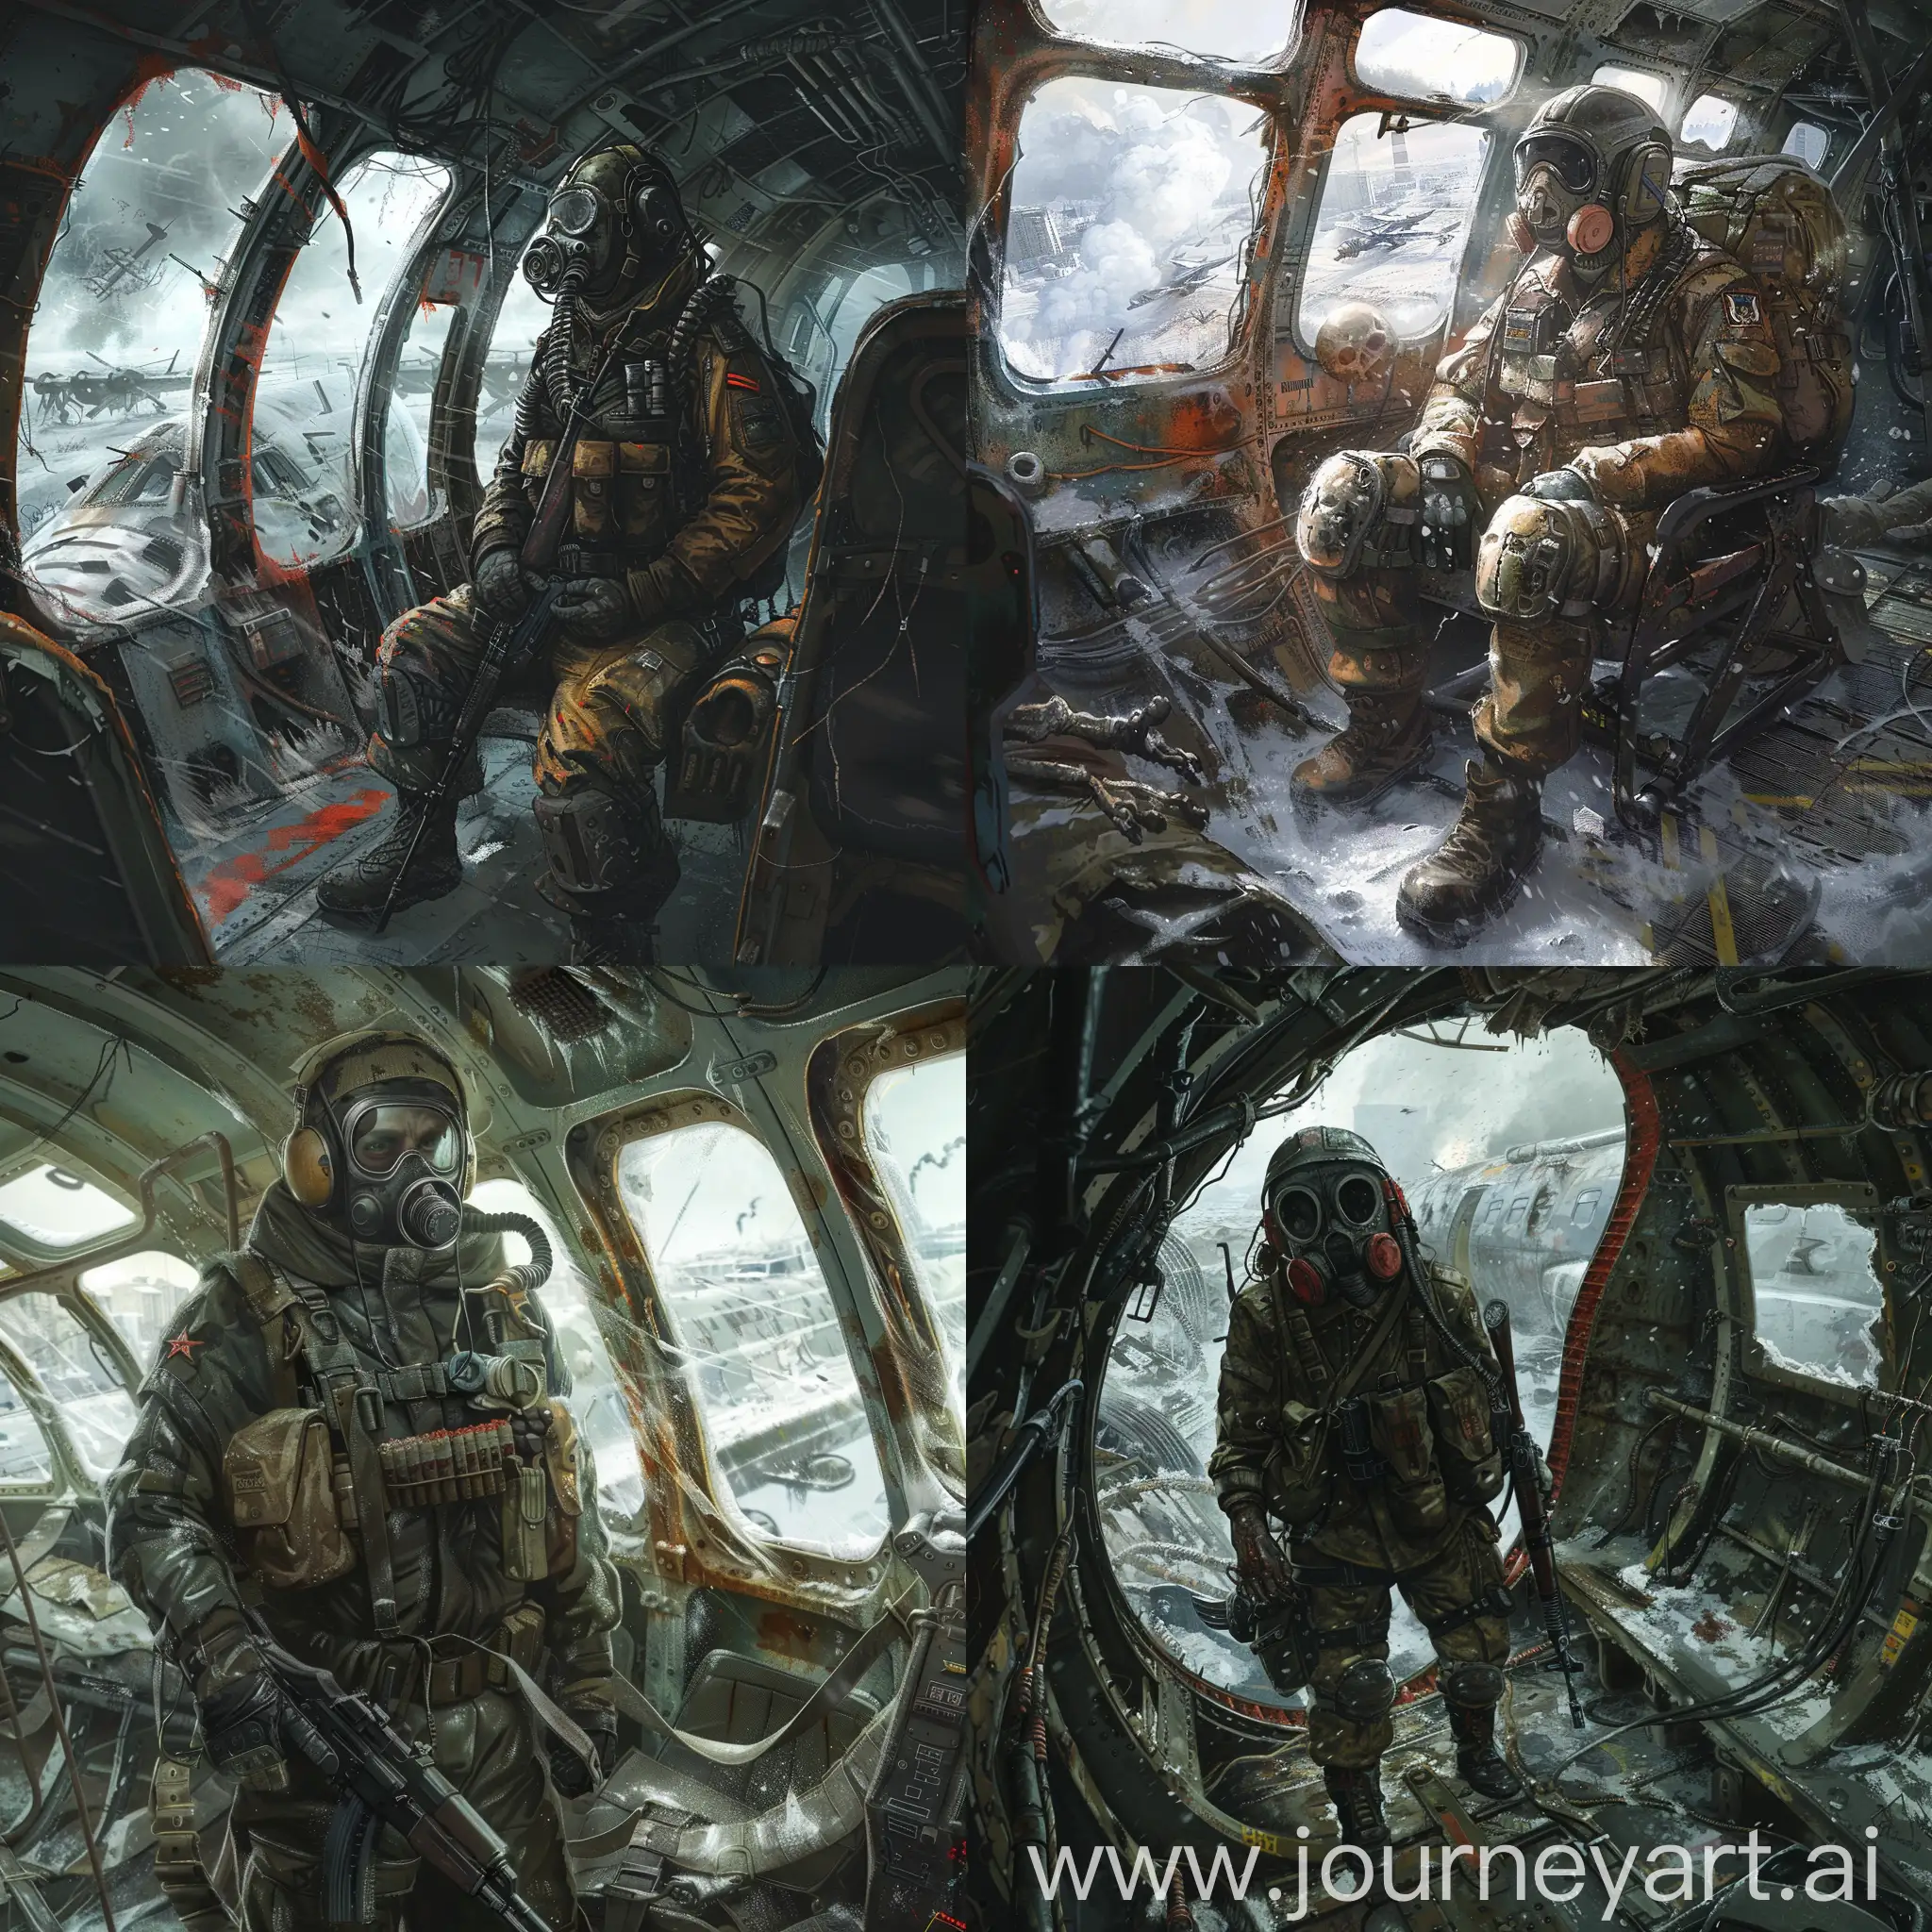 Make Metro 2033 art, Stalker in a gas mask, in a TSh-4 tank headset, in an old Soviet uniform with pouches on his body and belts, boots on his feet, with a small backpack on his back, with a Mosin sniper rifle in his hands, stalker stands with a tense and fighting pose inside the destroyed plane, through the windows of the plane you can see snow-covered and destroyed post-apocalyptic Moscow, on the seats of the destroyed plane where the stalker is located, you can see the burnt corpses of skeletons in burnt clothes in places.